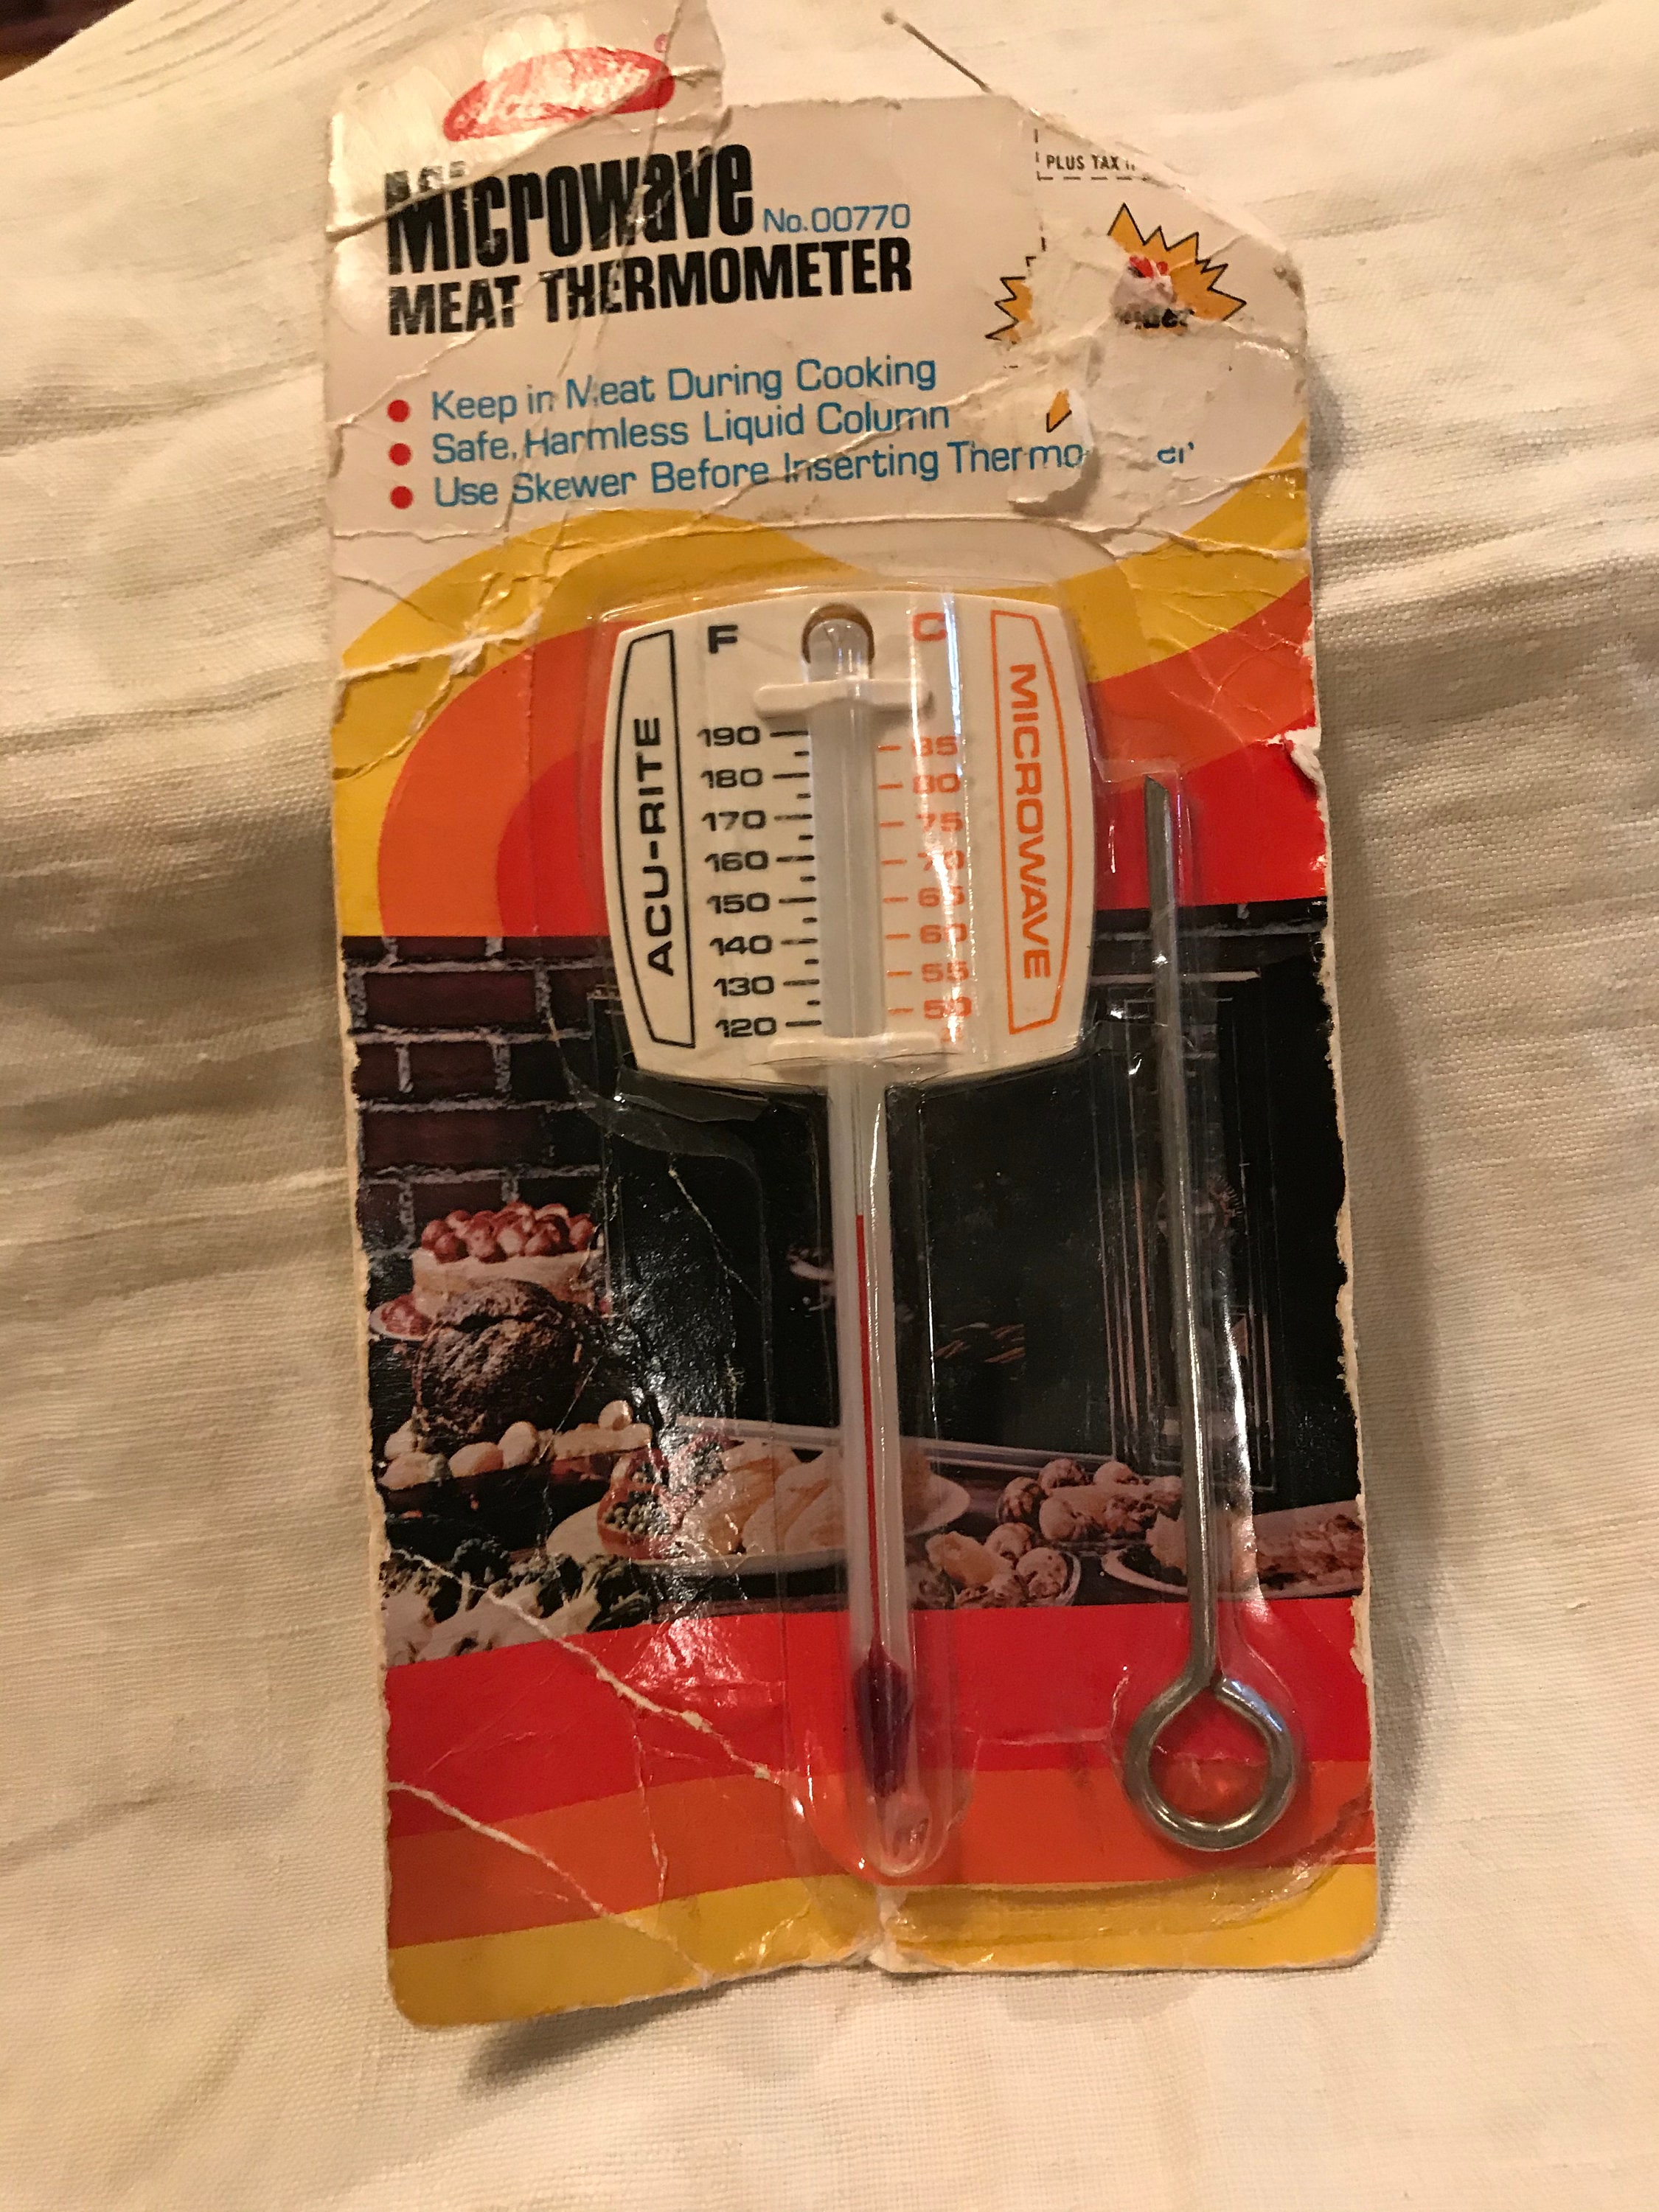 Microwave Meat Thermometer by Acu-rite, Vintage 1990s 